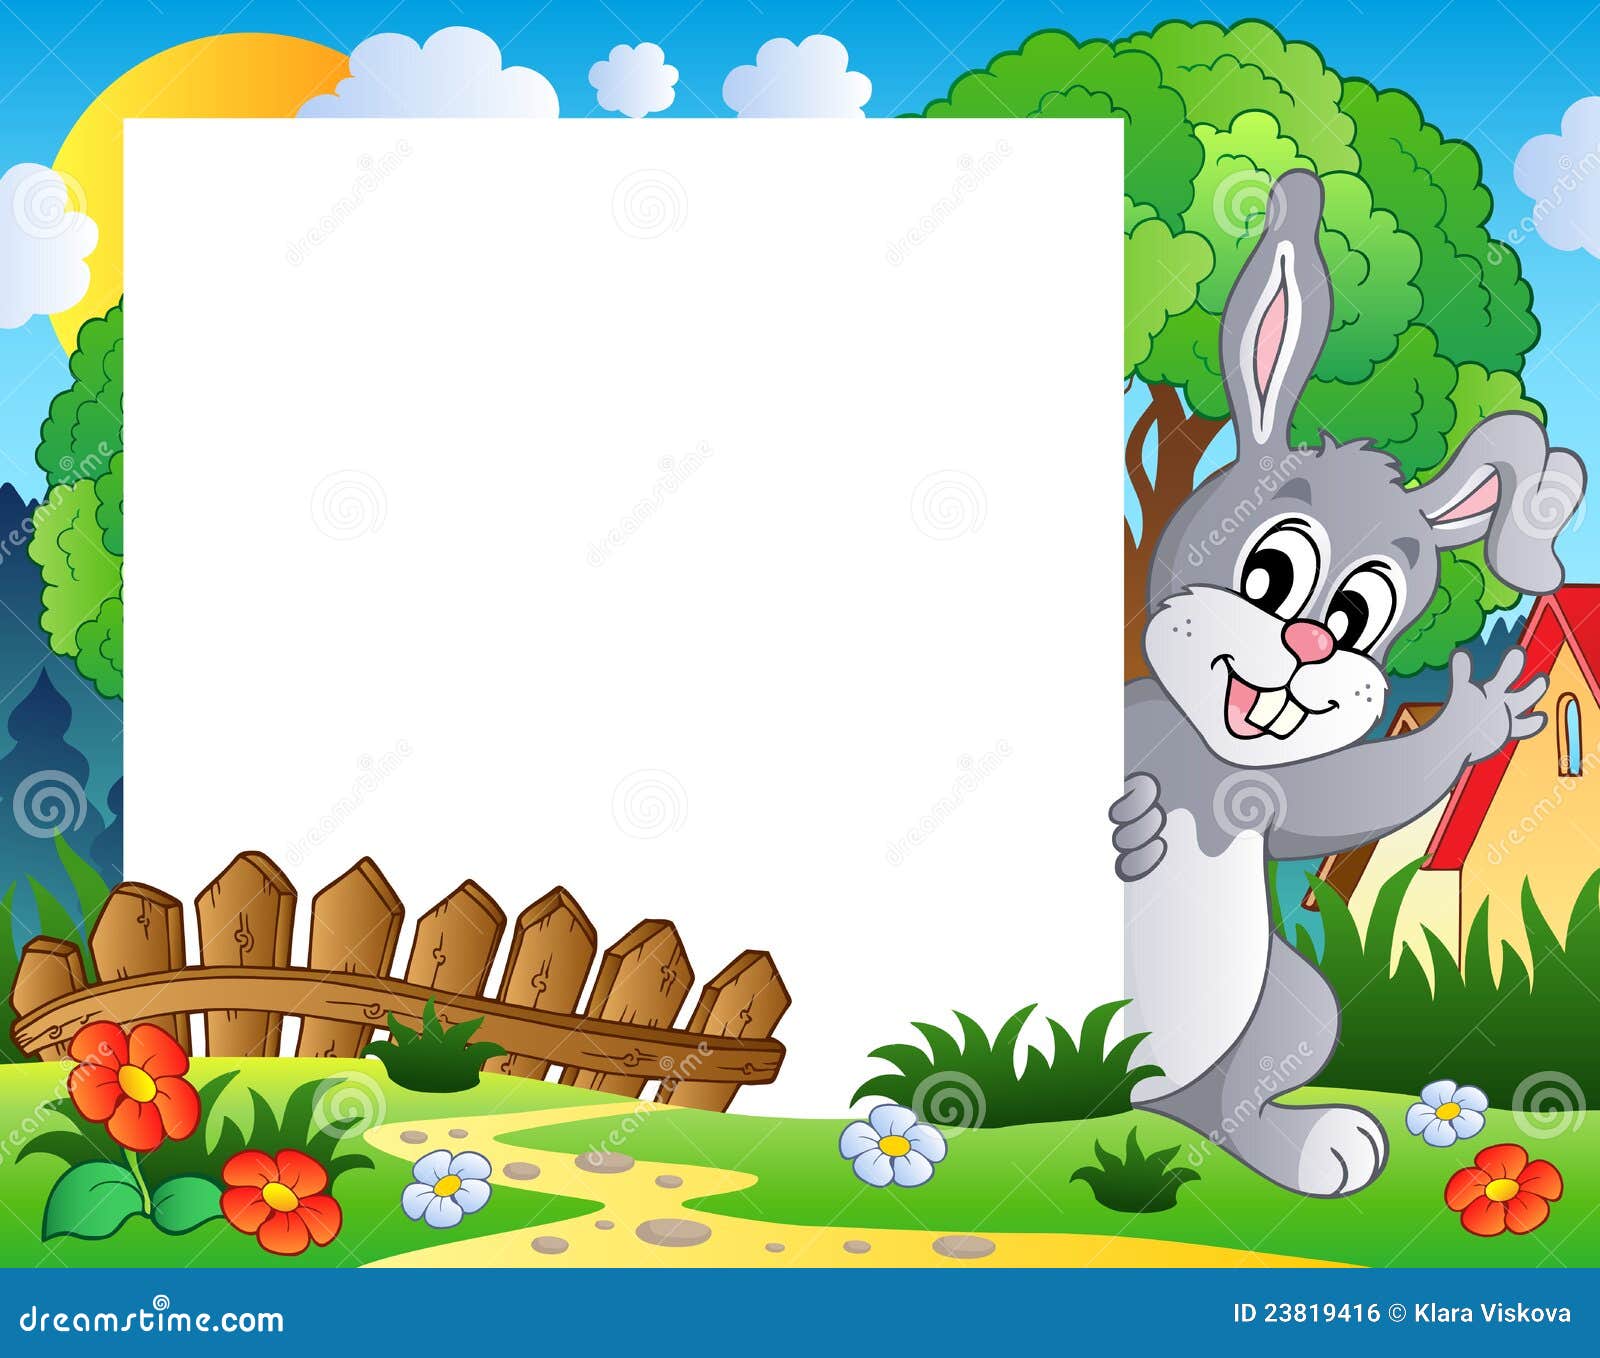 free easter themed clip art - photo #20